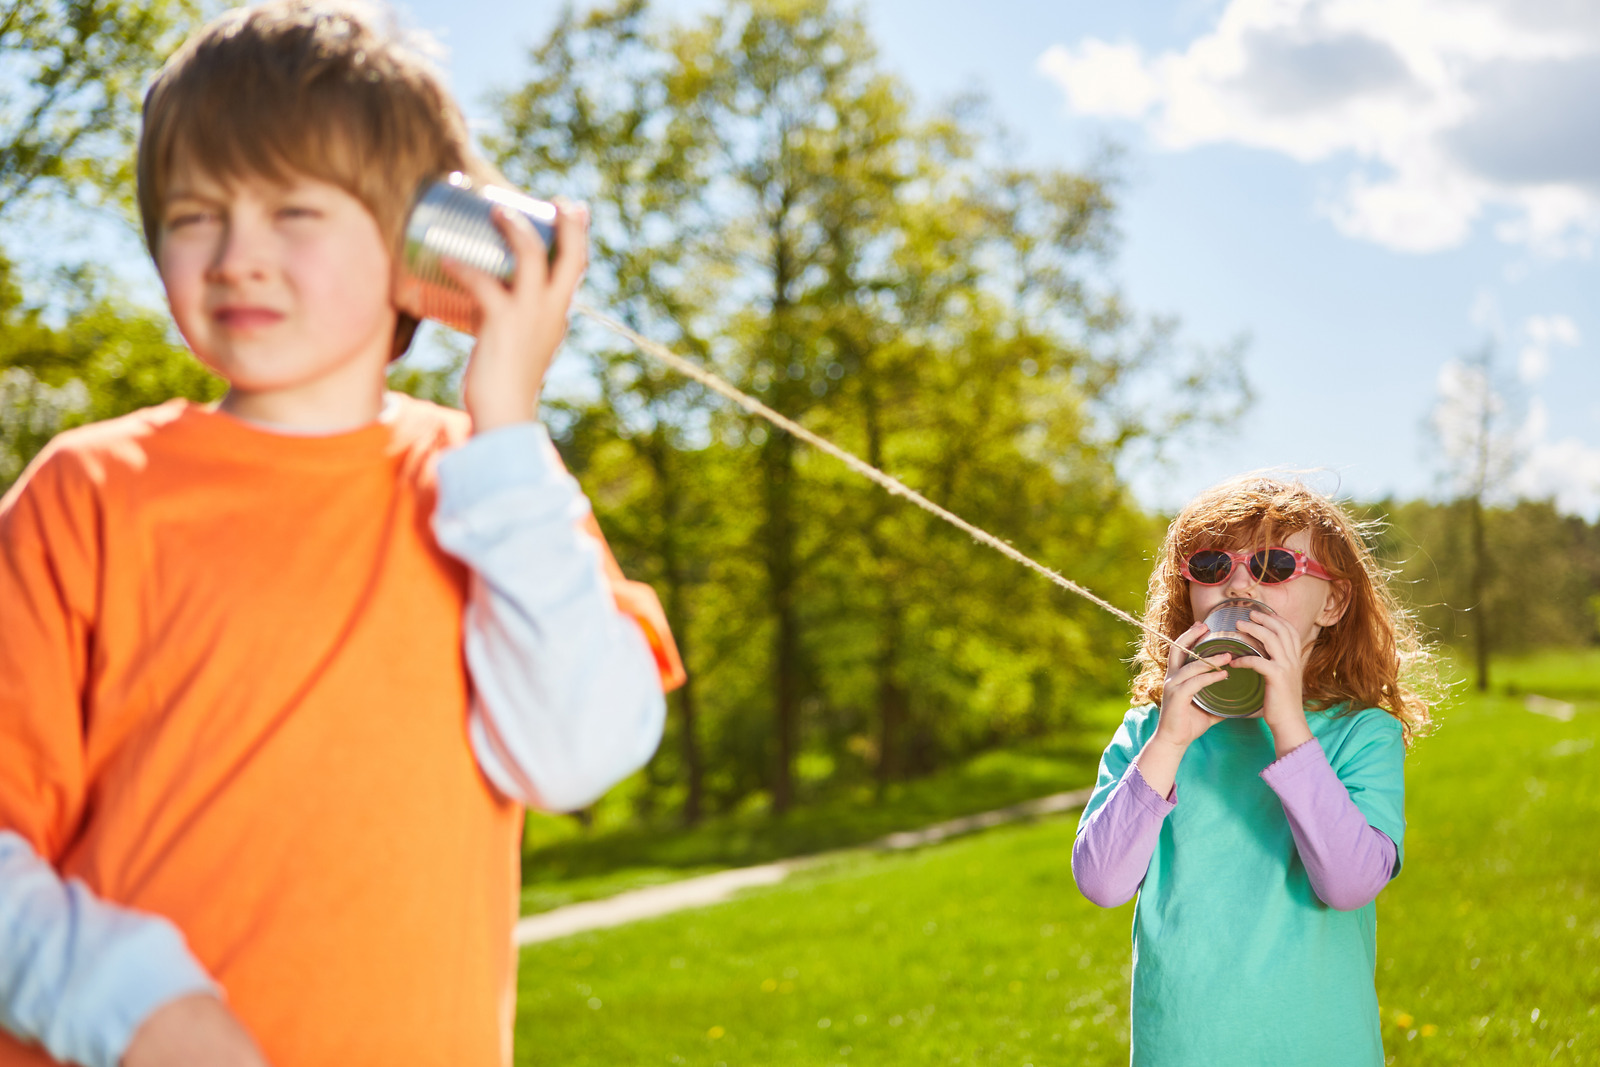 Two children communicate with a corded telephone in a park